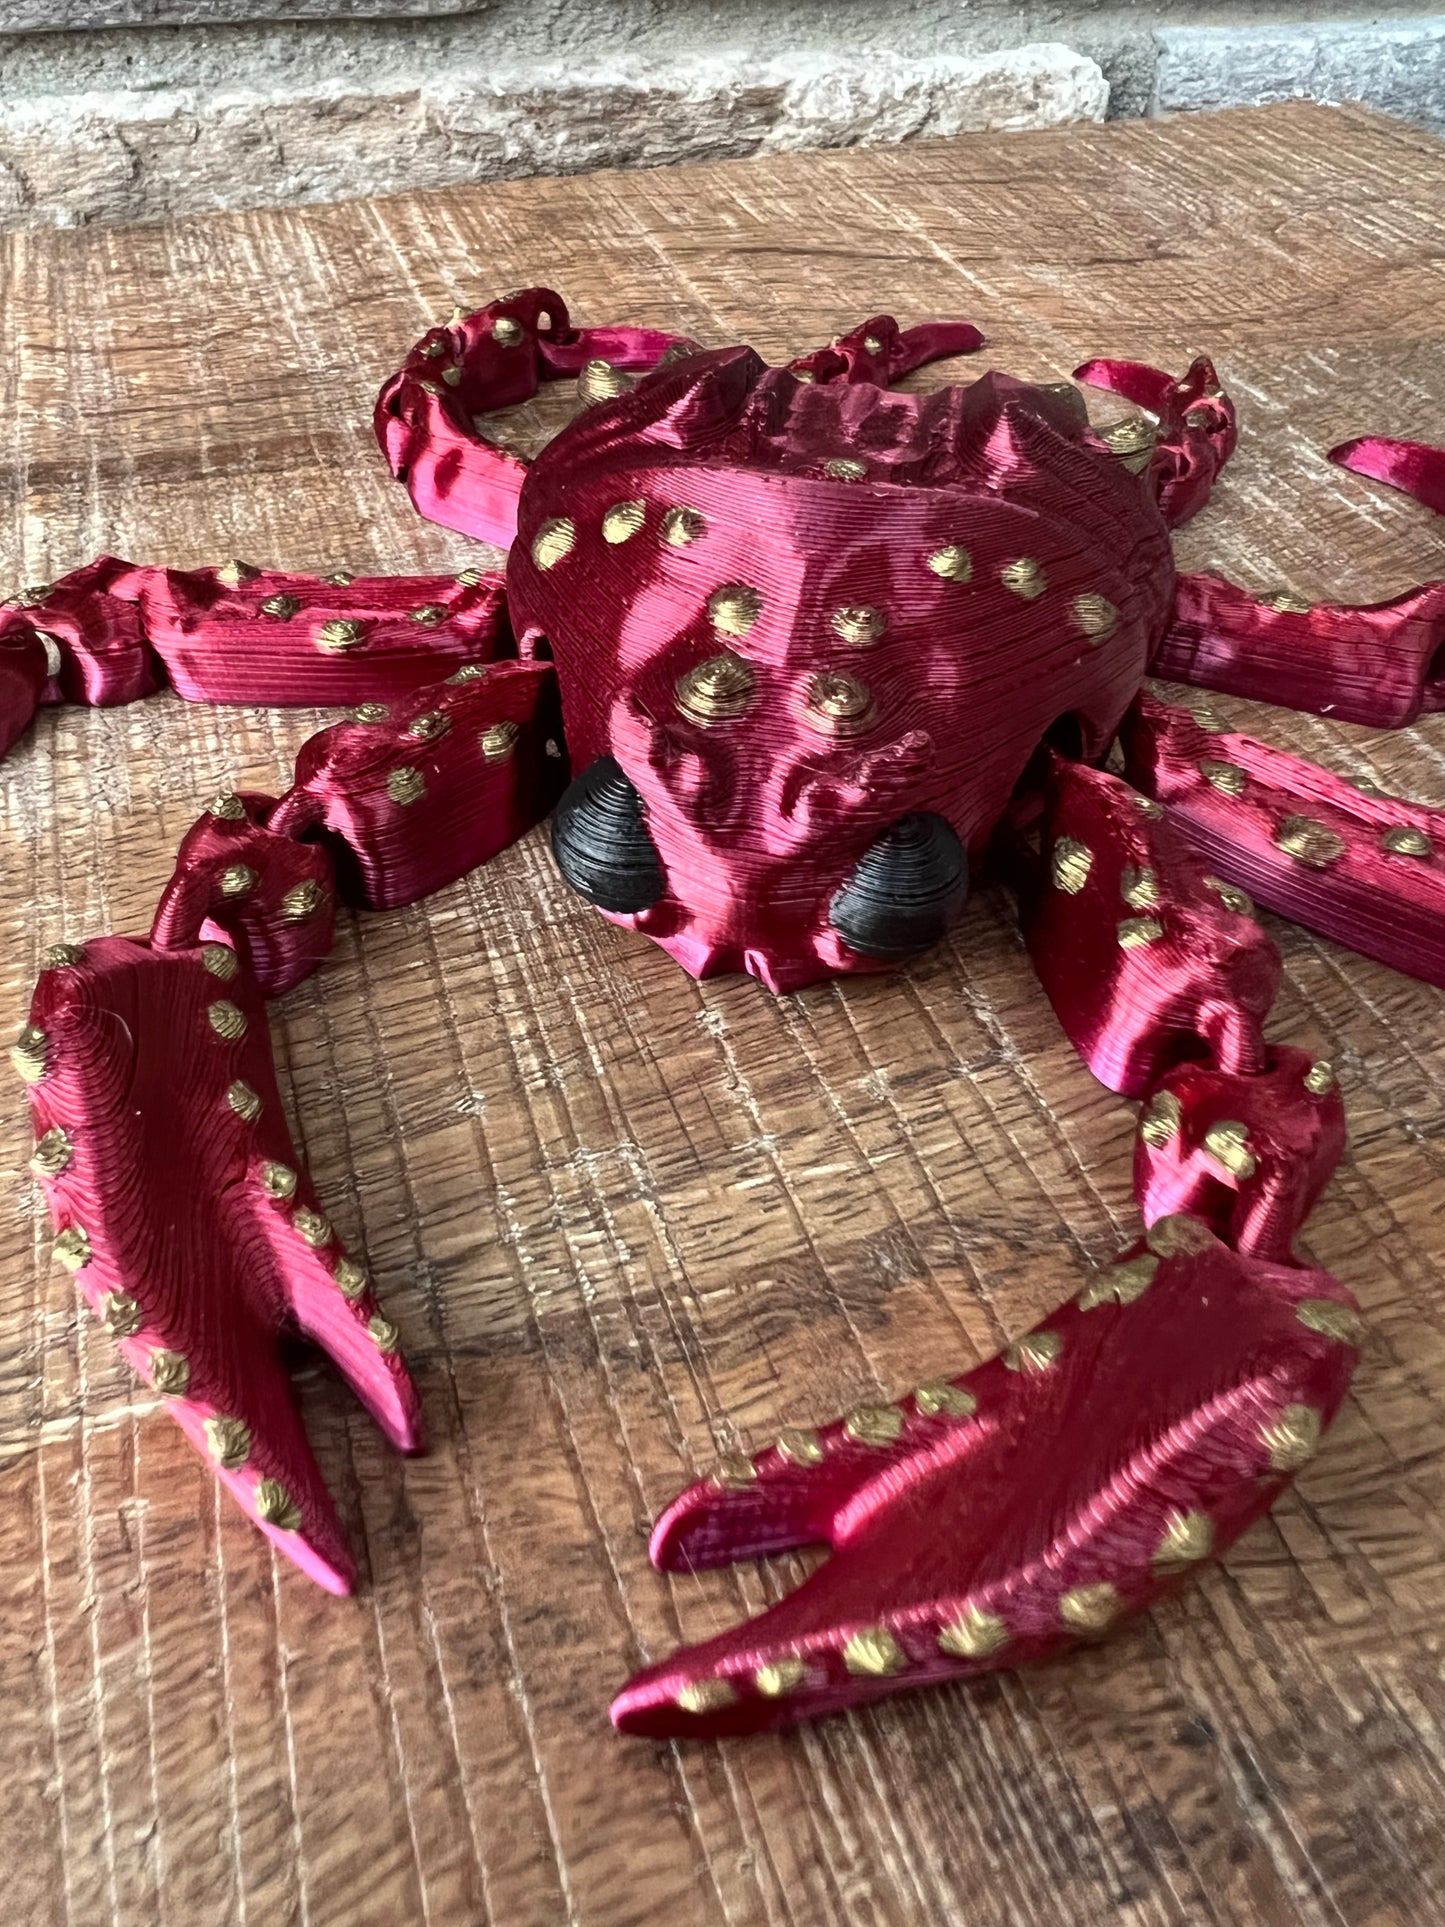 Spider Crab | 3d Printed | Articulated Flexible | Custom Fidget Toy